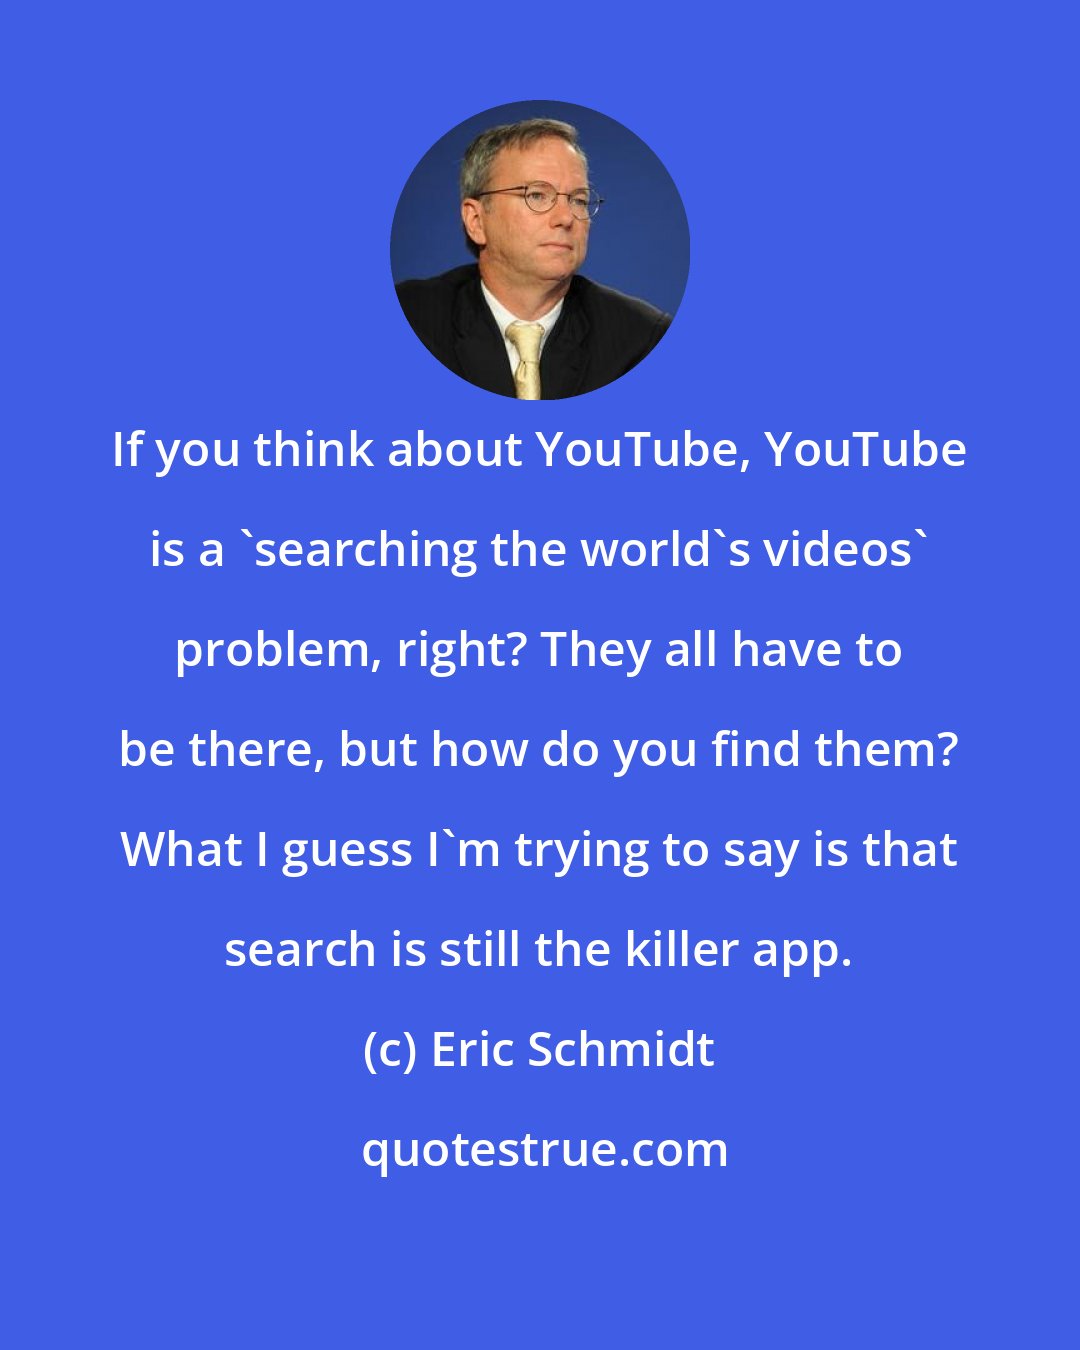 Eric Schmidt: If you think about YouTube, YouTube is a 'searching the world's videos' problem, right? They all have to be there, but how do you find them? What I guess I'm trying to say is that search is still the killer app.